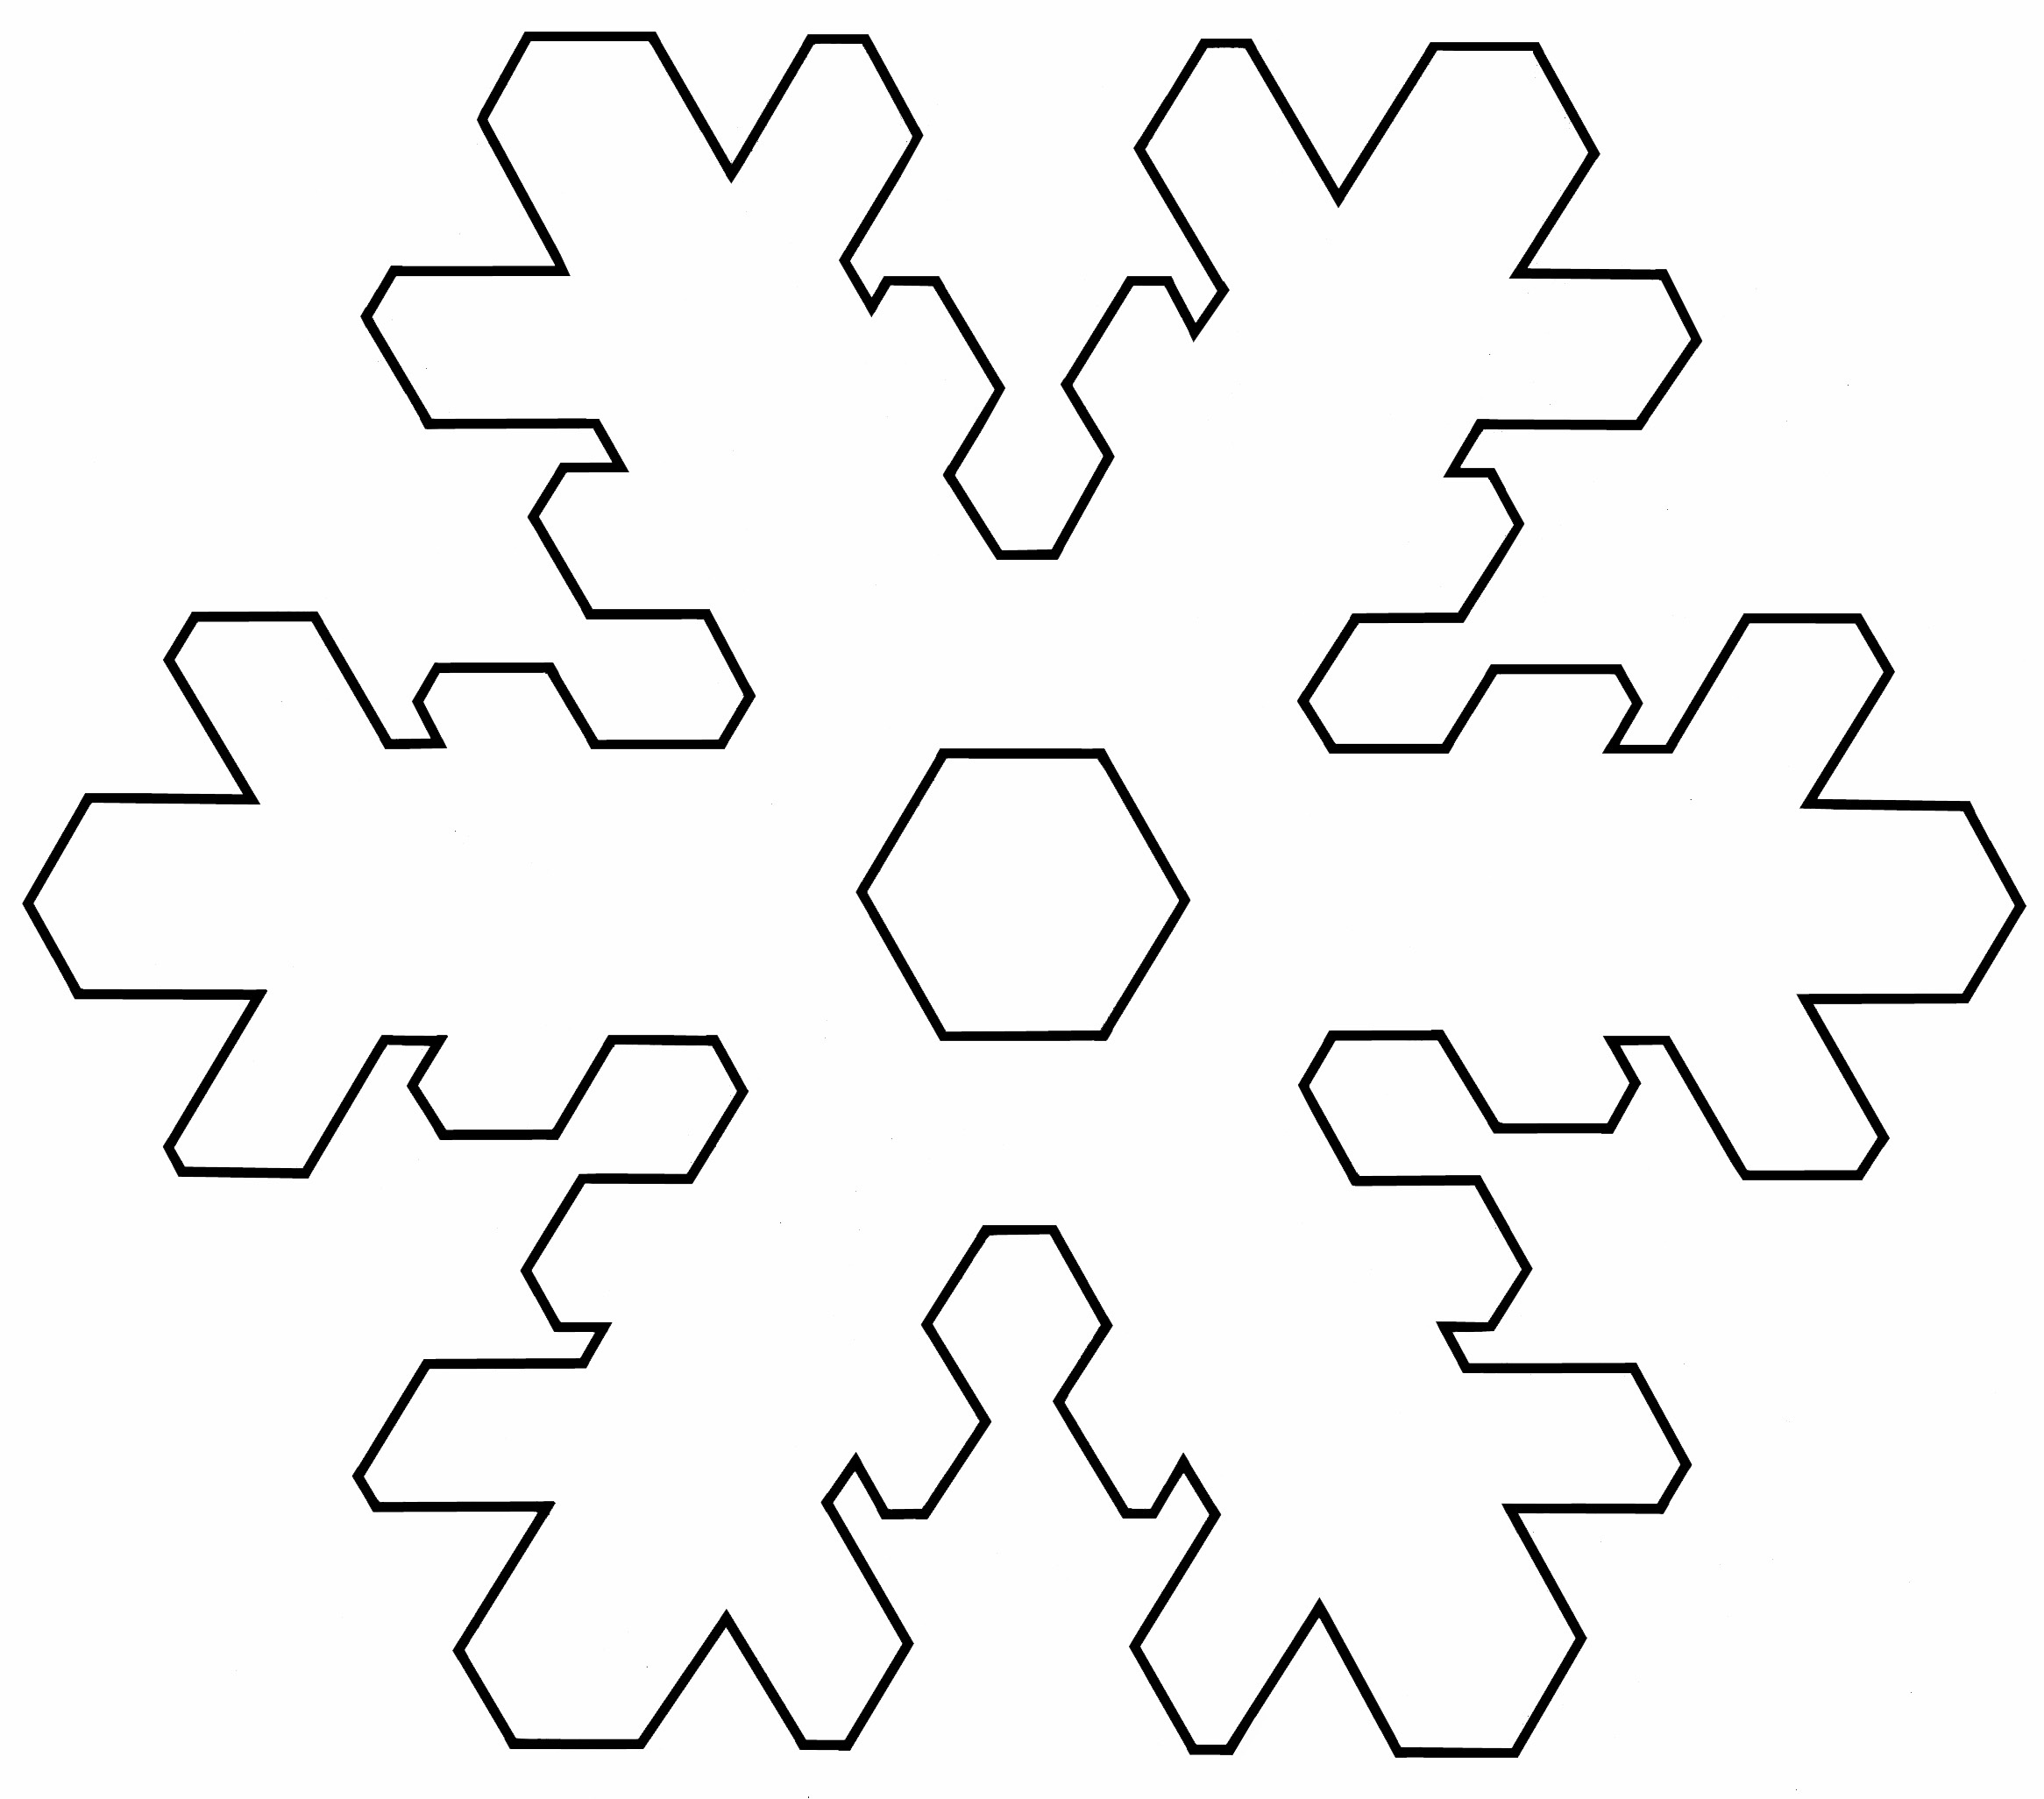 Free Printable Paper Snowflake Templates Get What You Need For Free